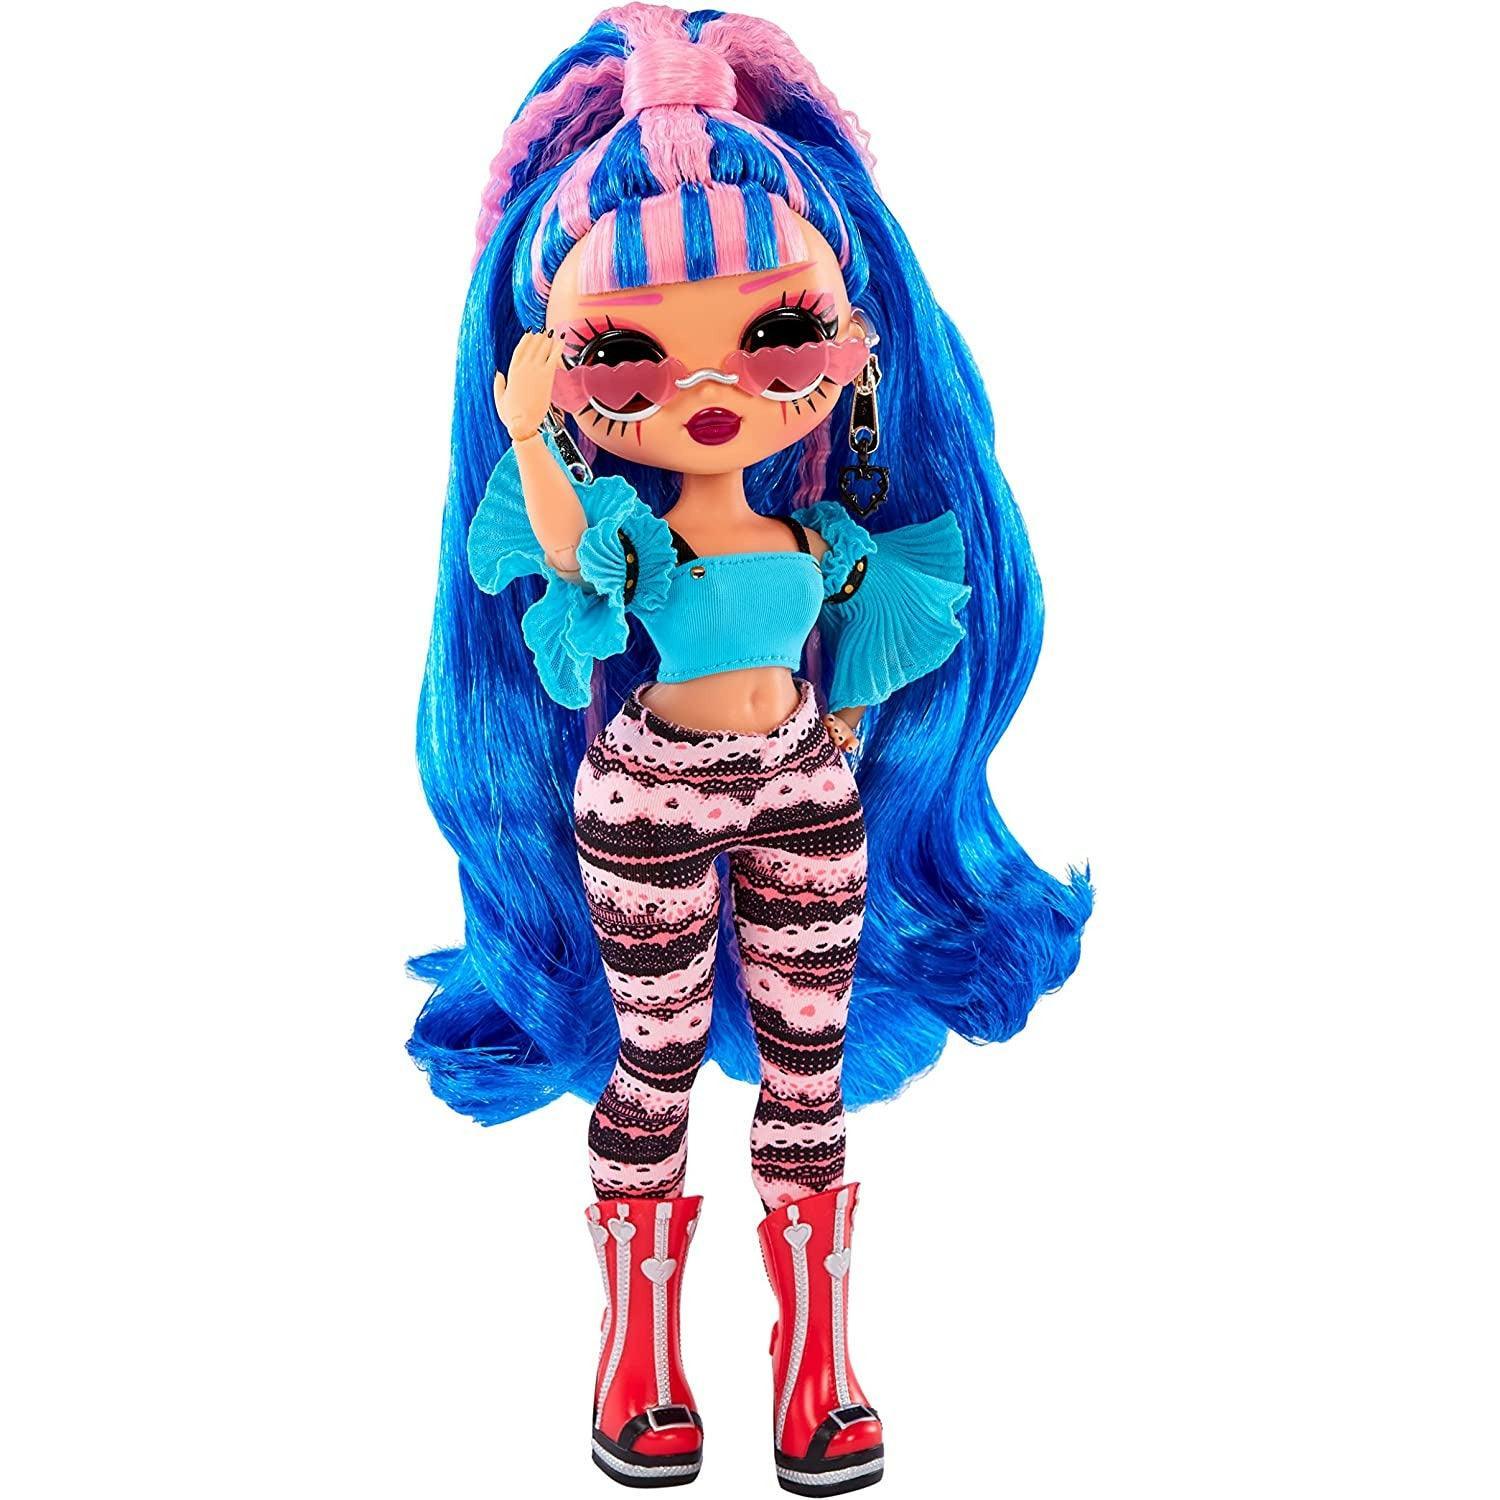 LOL Surprise OMG Queens Queens Prism Fashion Doll with 20 Surprises Including Outfit and Accessories - BumbleToys - 5-7 Years, Dolls, Fashion Dolls & Accessories, Girls, L.O.L, OXE, Pre-Order